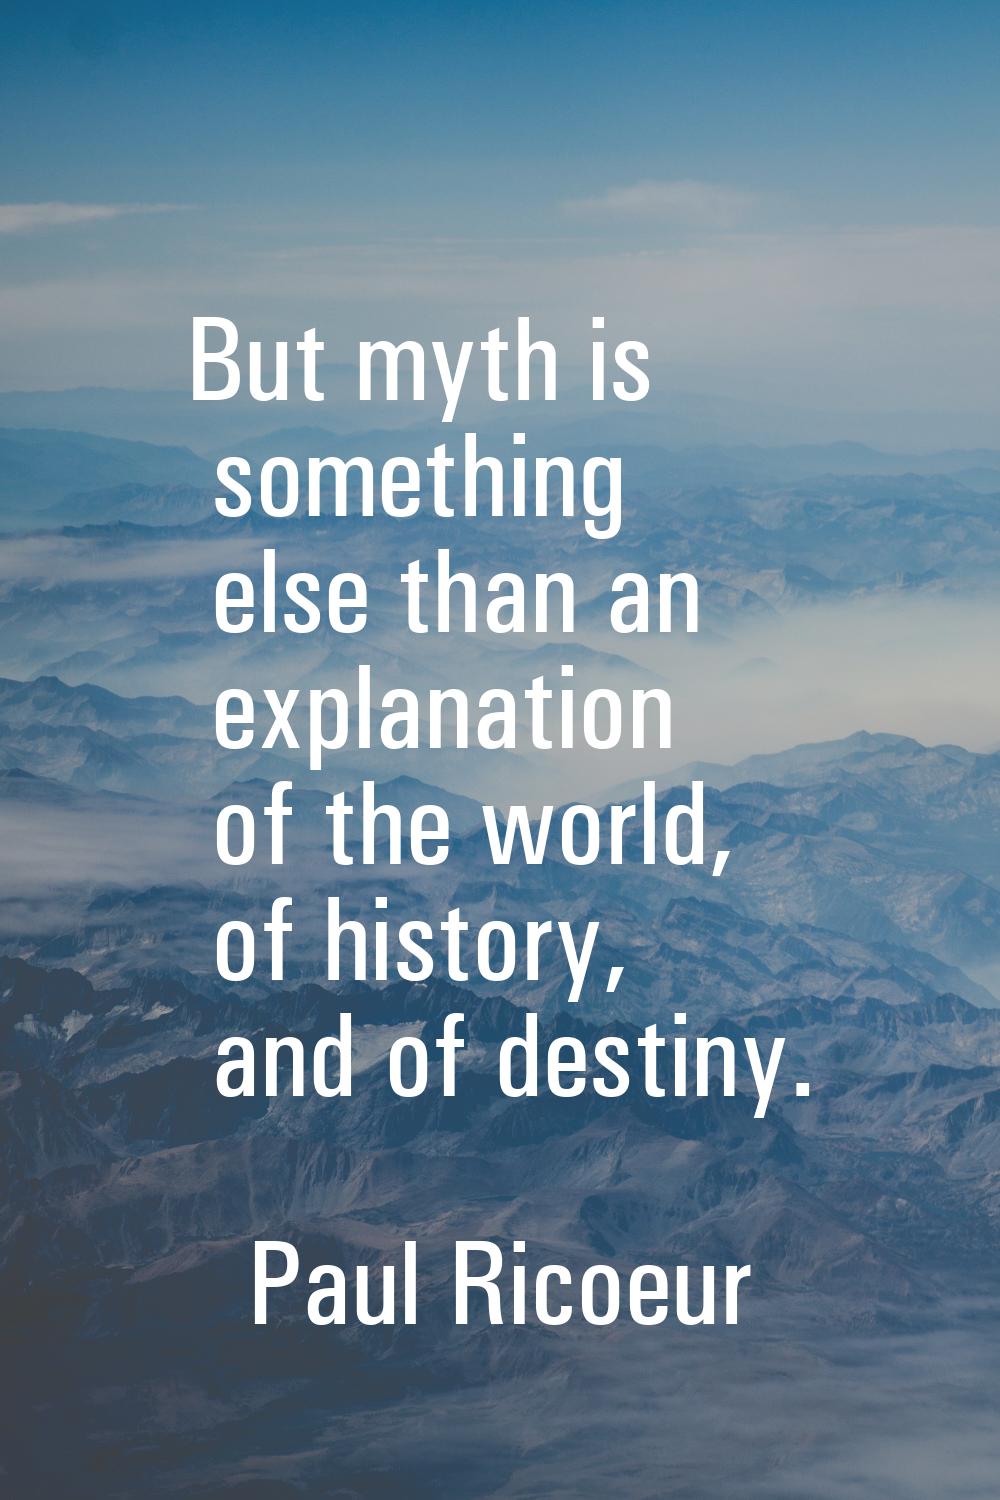 But myth is something else than an explanation of the world, of history, and of destiny.